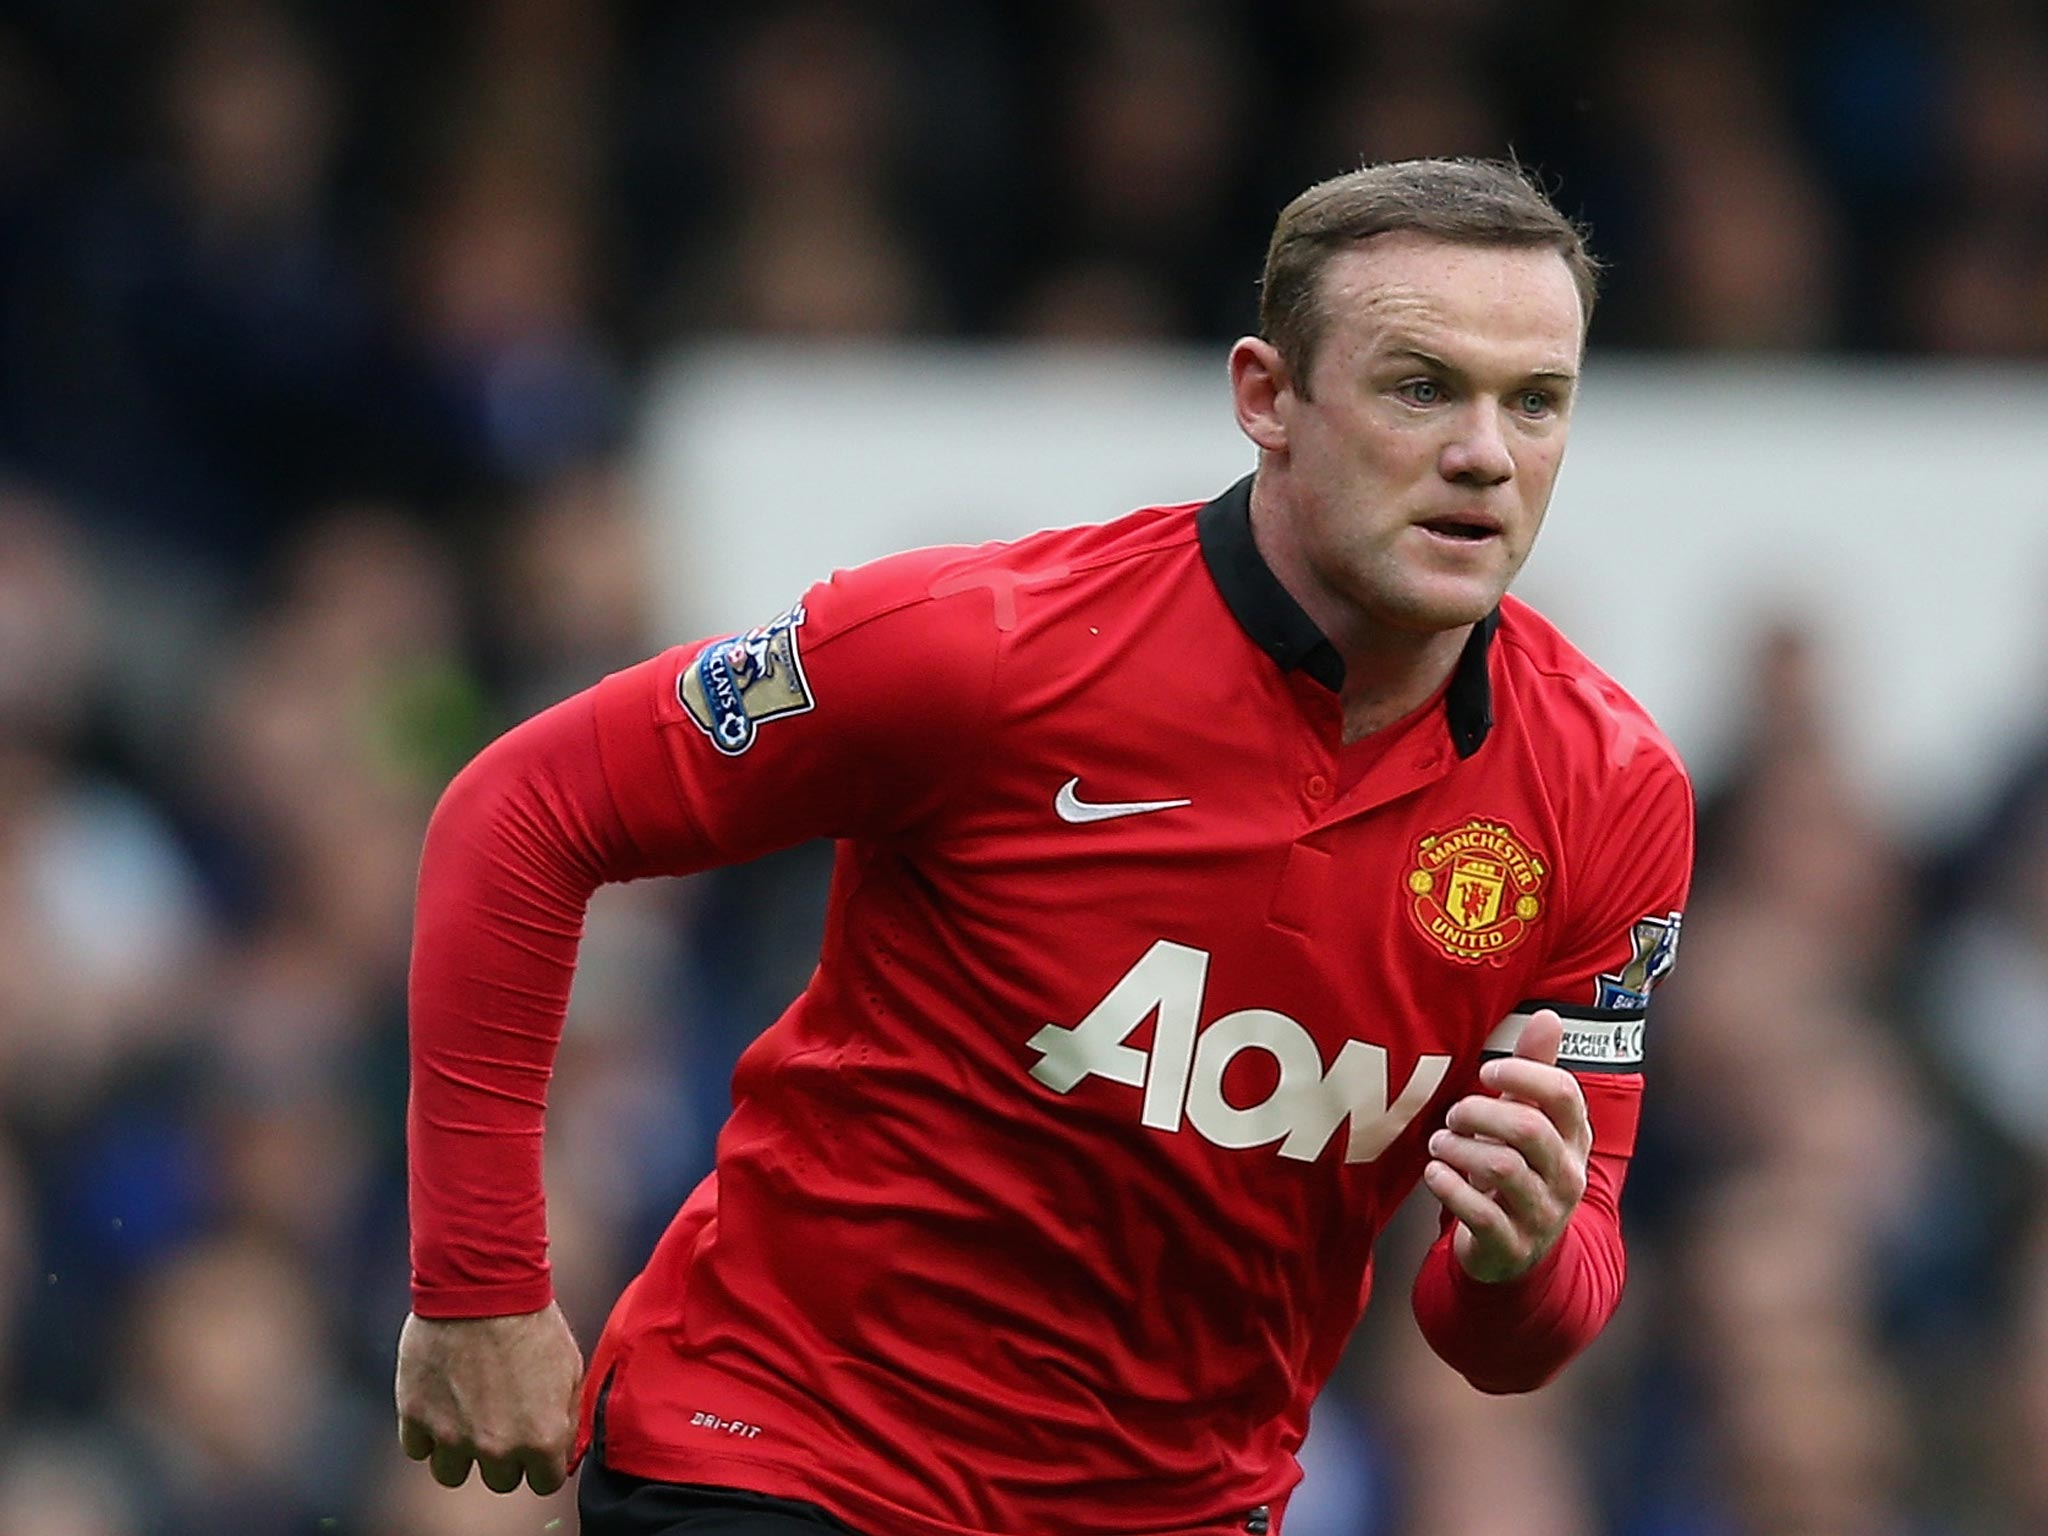 Rooney was immediately sent for a scan to assess the damage